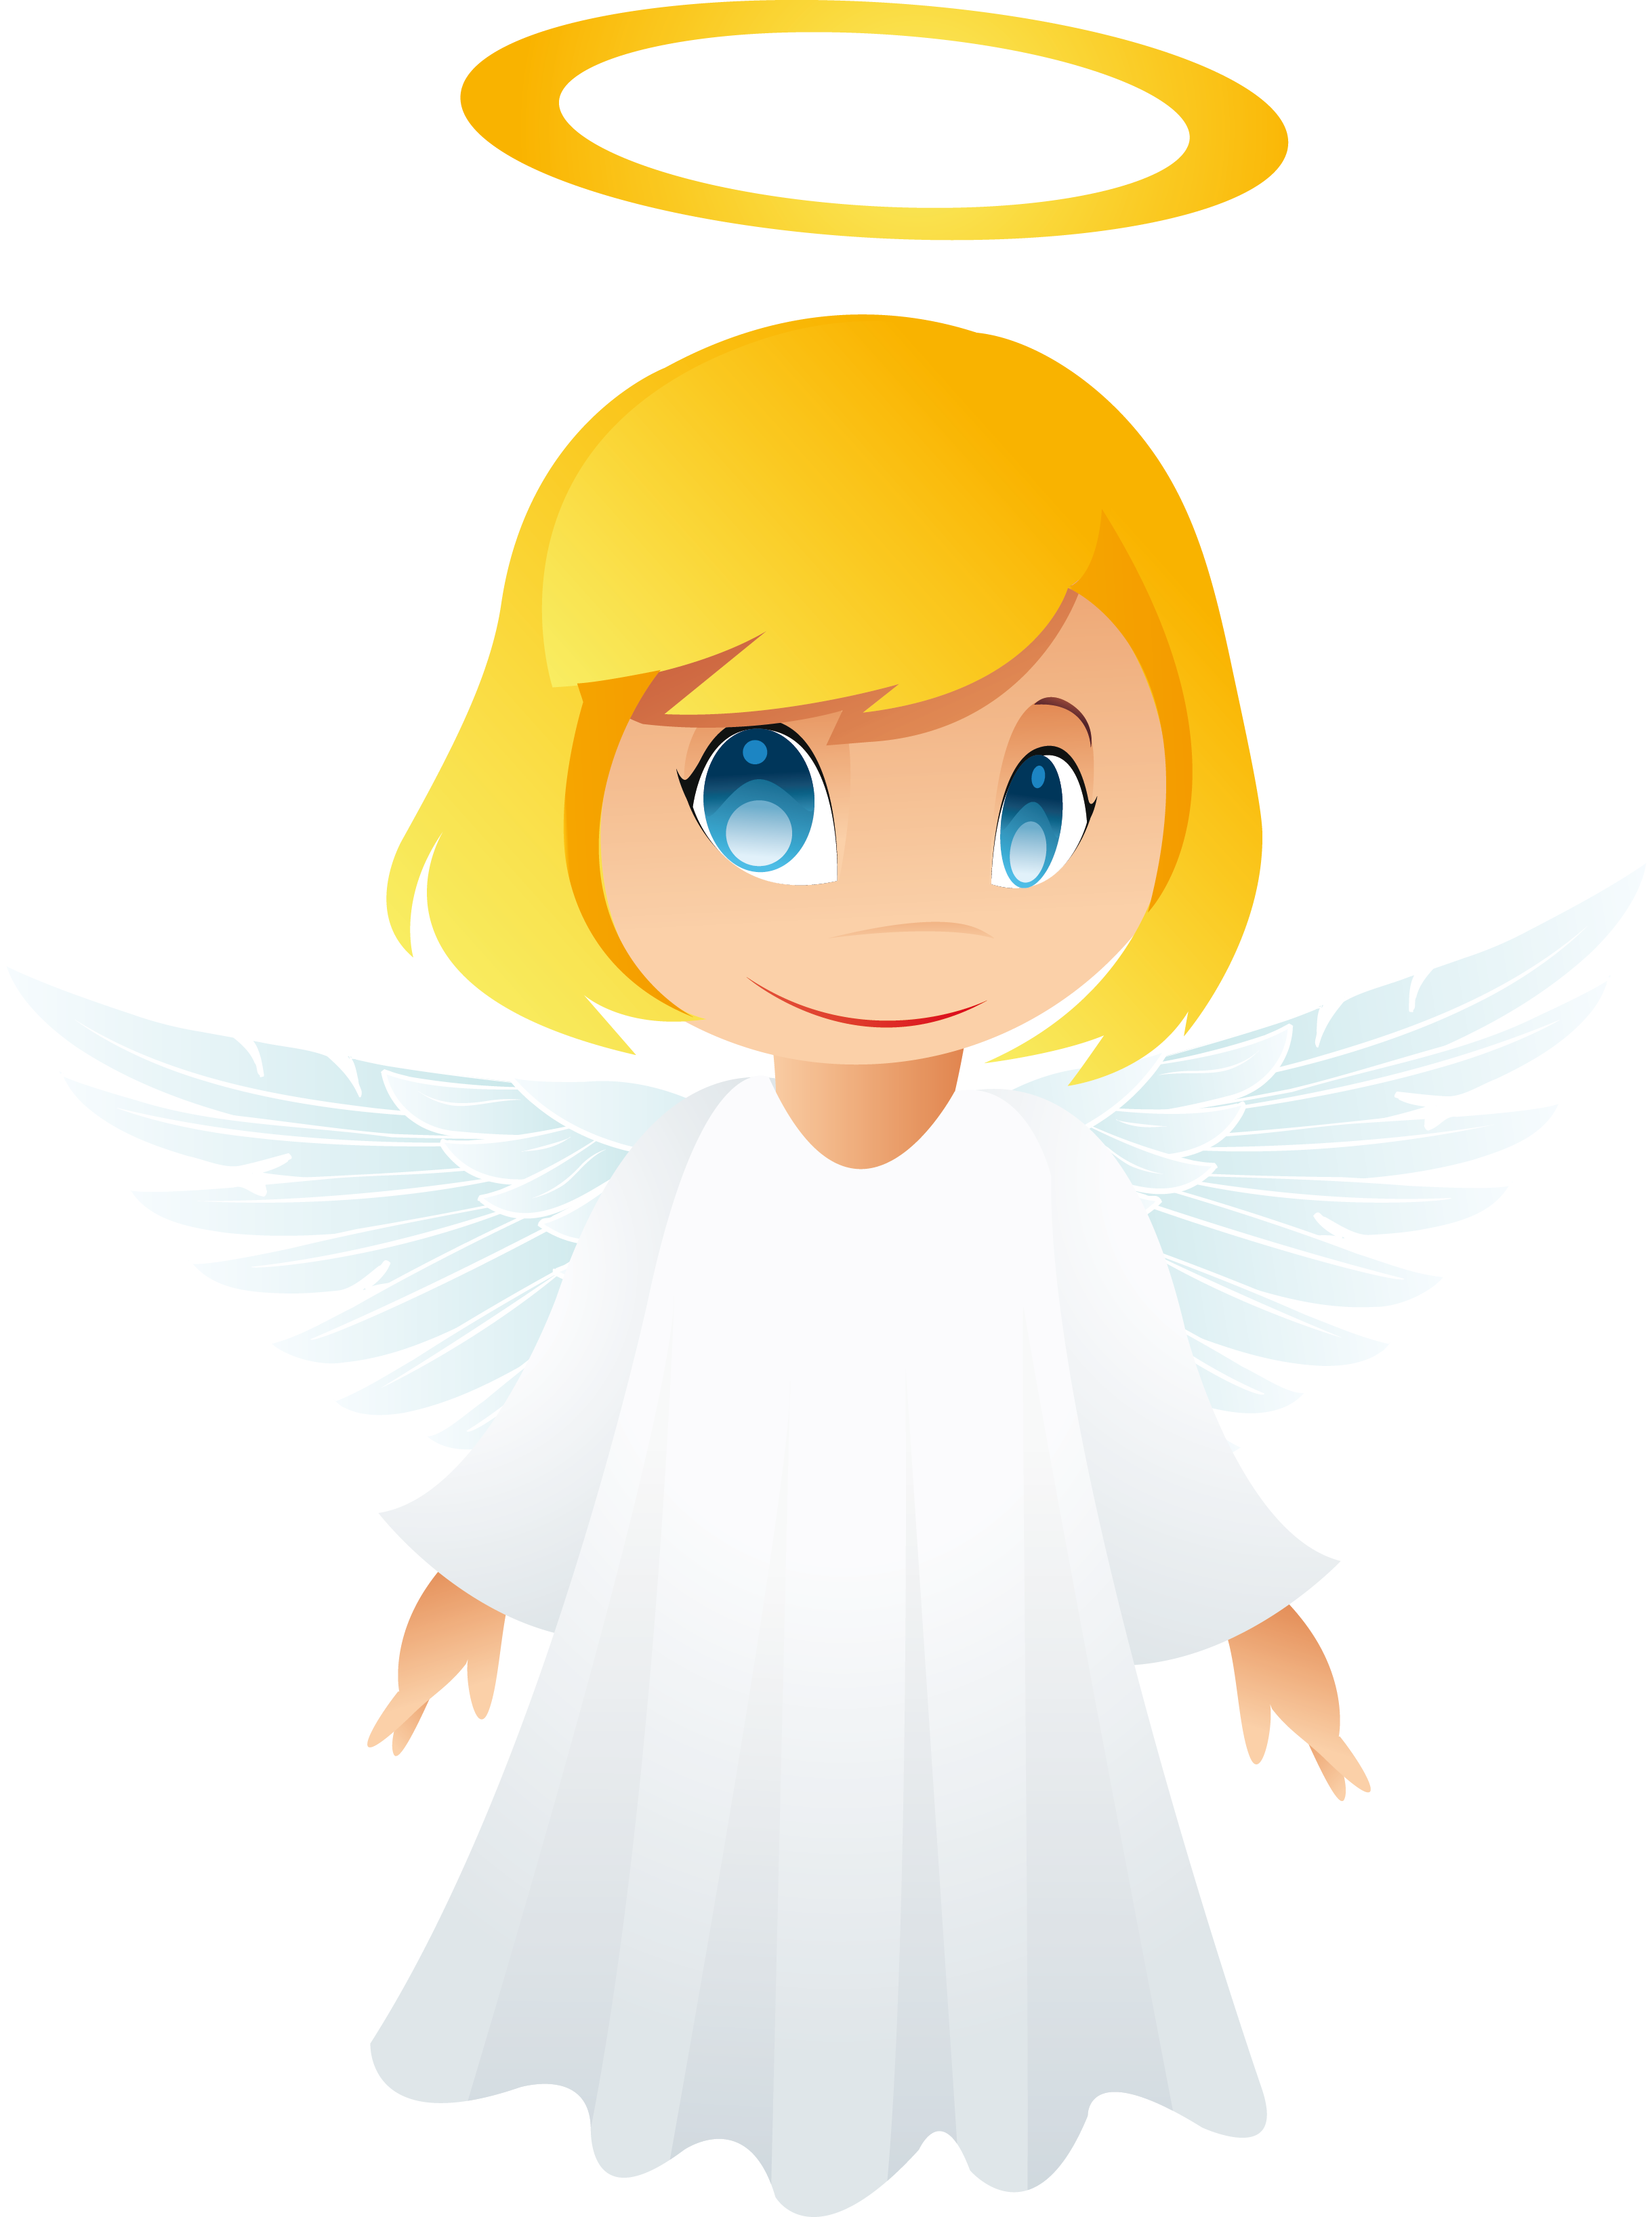 Angel clipart free graphics o - Angel Images Clip Art